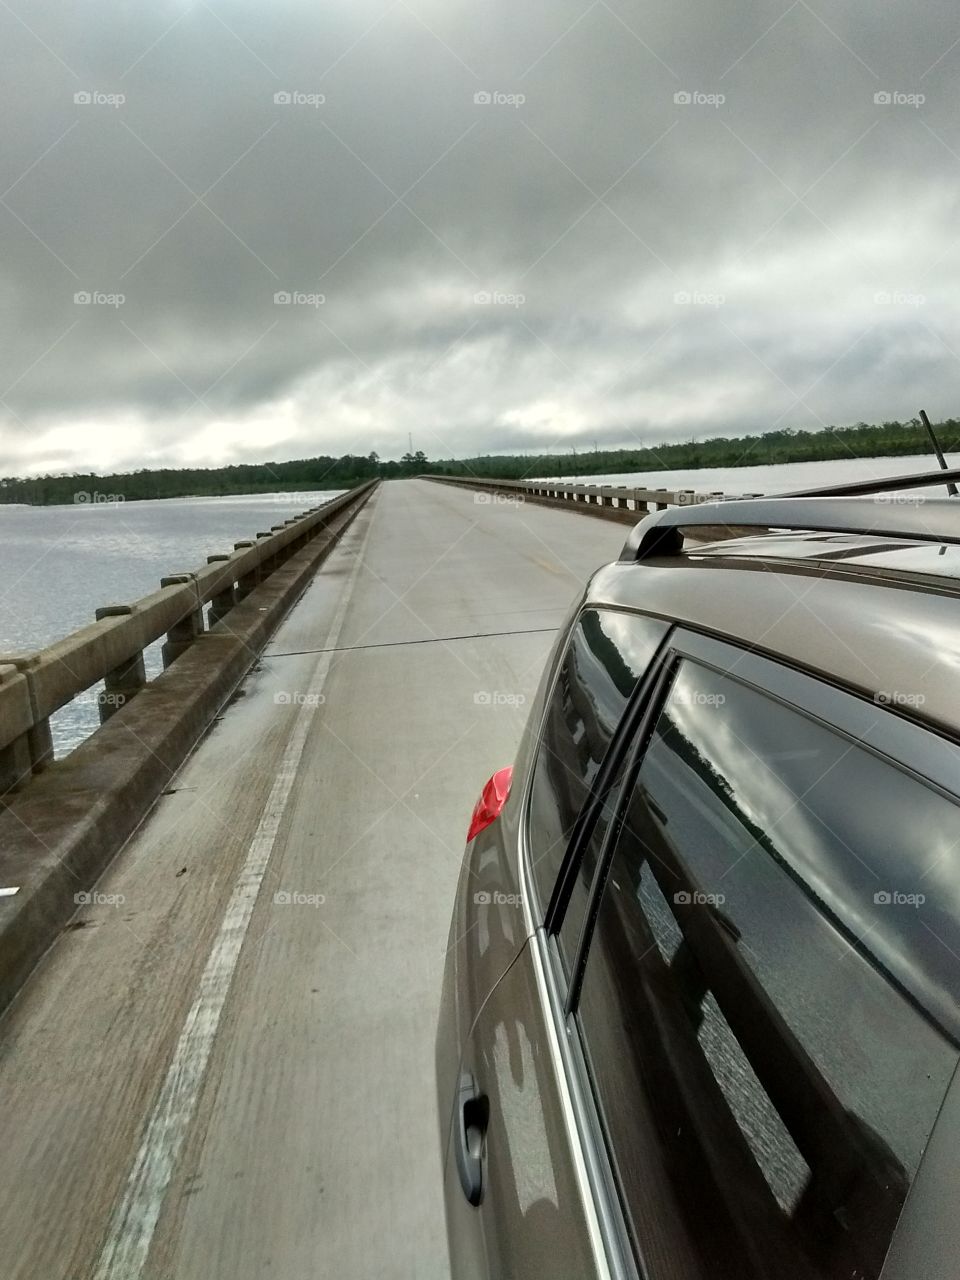 driving across a long bridge with a gray sky above